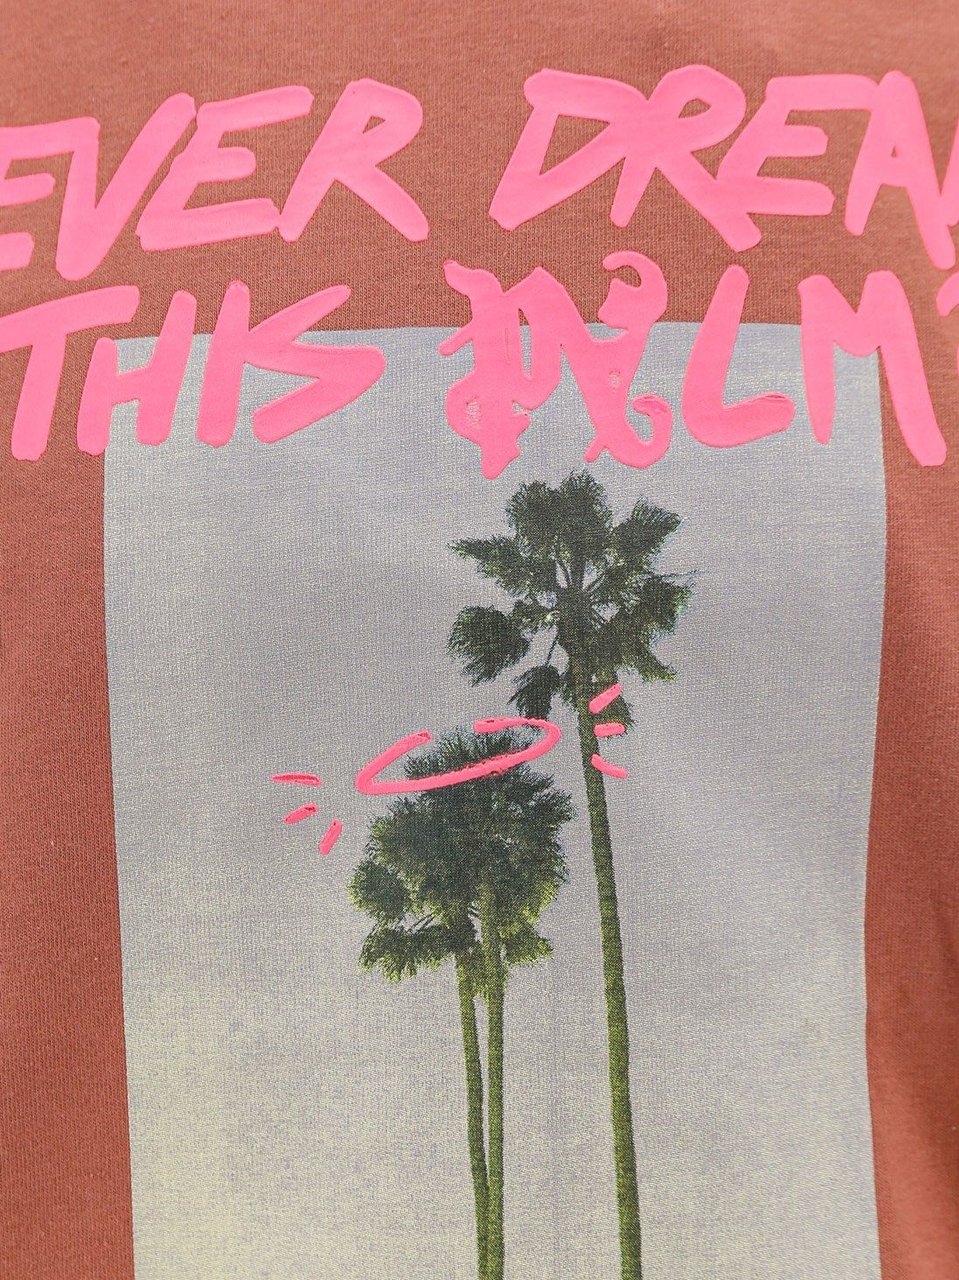 Palm Angels Palm Dream t-shirt with print on the front Bruin